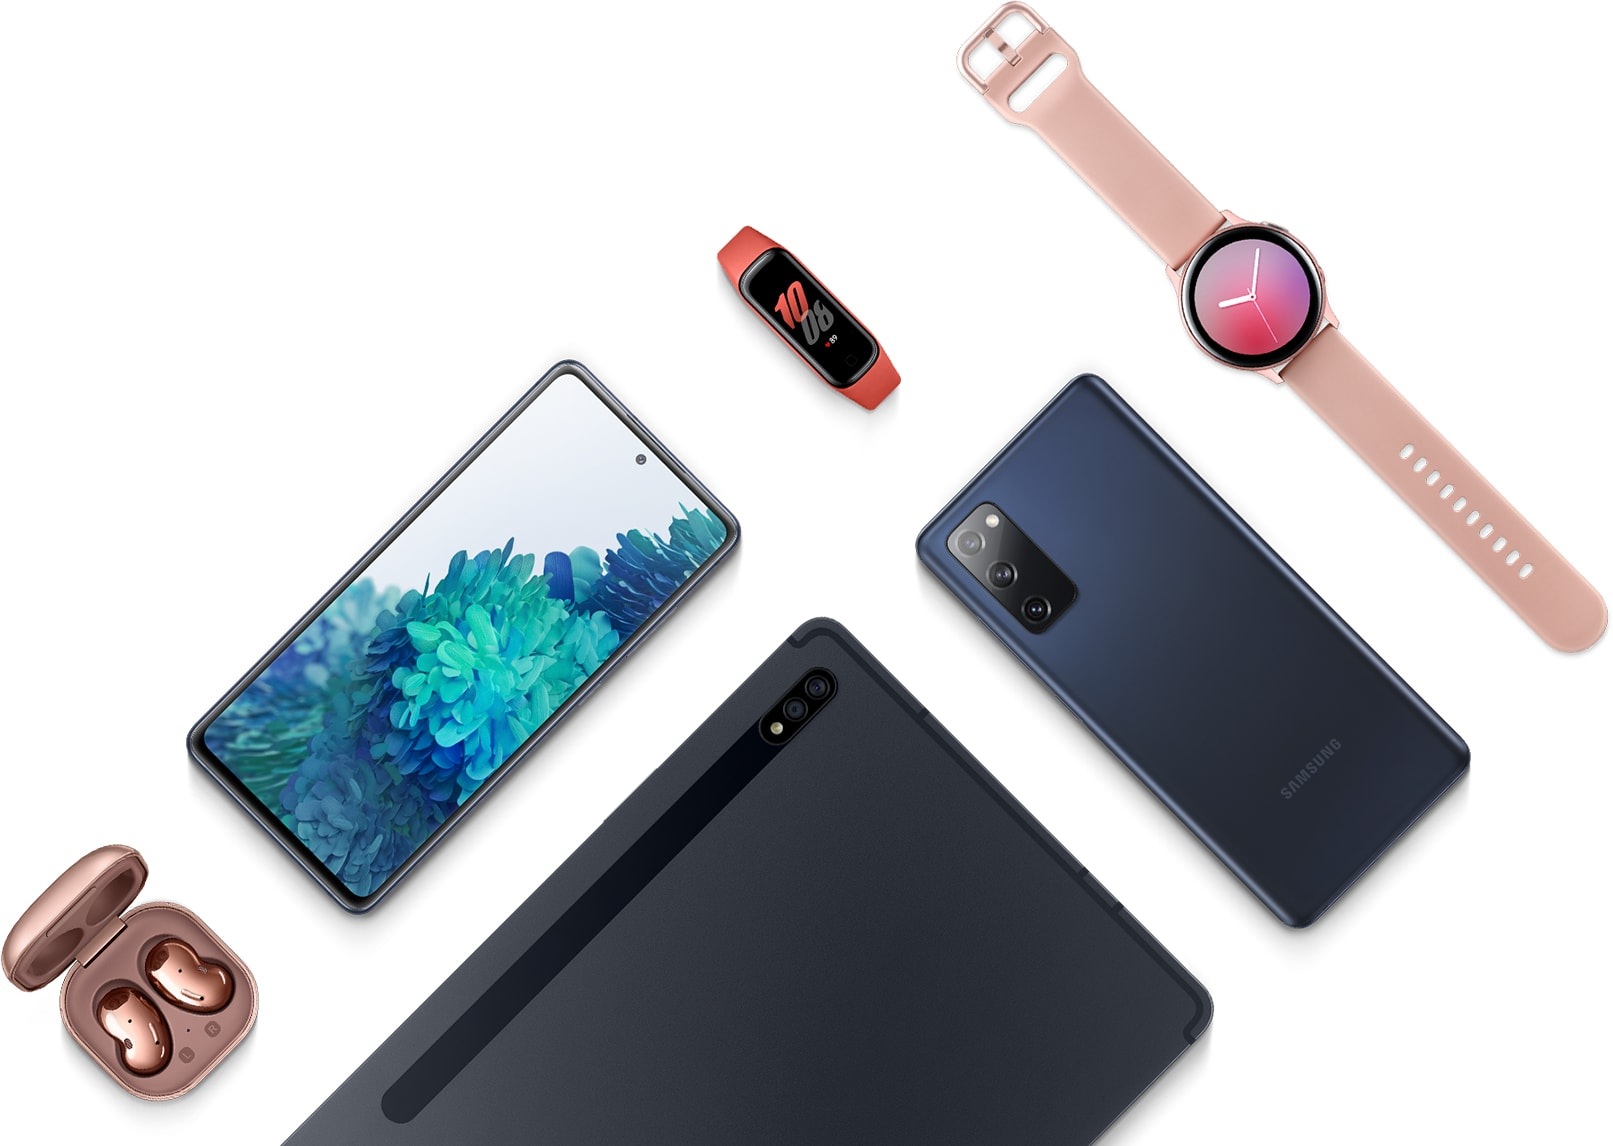 A flatlay with the Galaxy S20 FE in Cloud Navy seen face up, Galaxy S20 FE in Cloud Navy laying facedown, Galaxy Tab S7 in Mystic Black, Galaxy Buds Live earbuds in Mystic Bronze, Galaxy Fit2 in Red, and Galaxy Watch Active2 in Pink Gold.